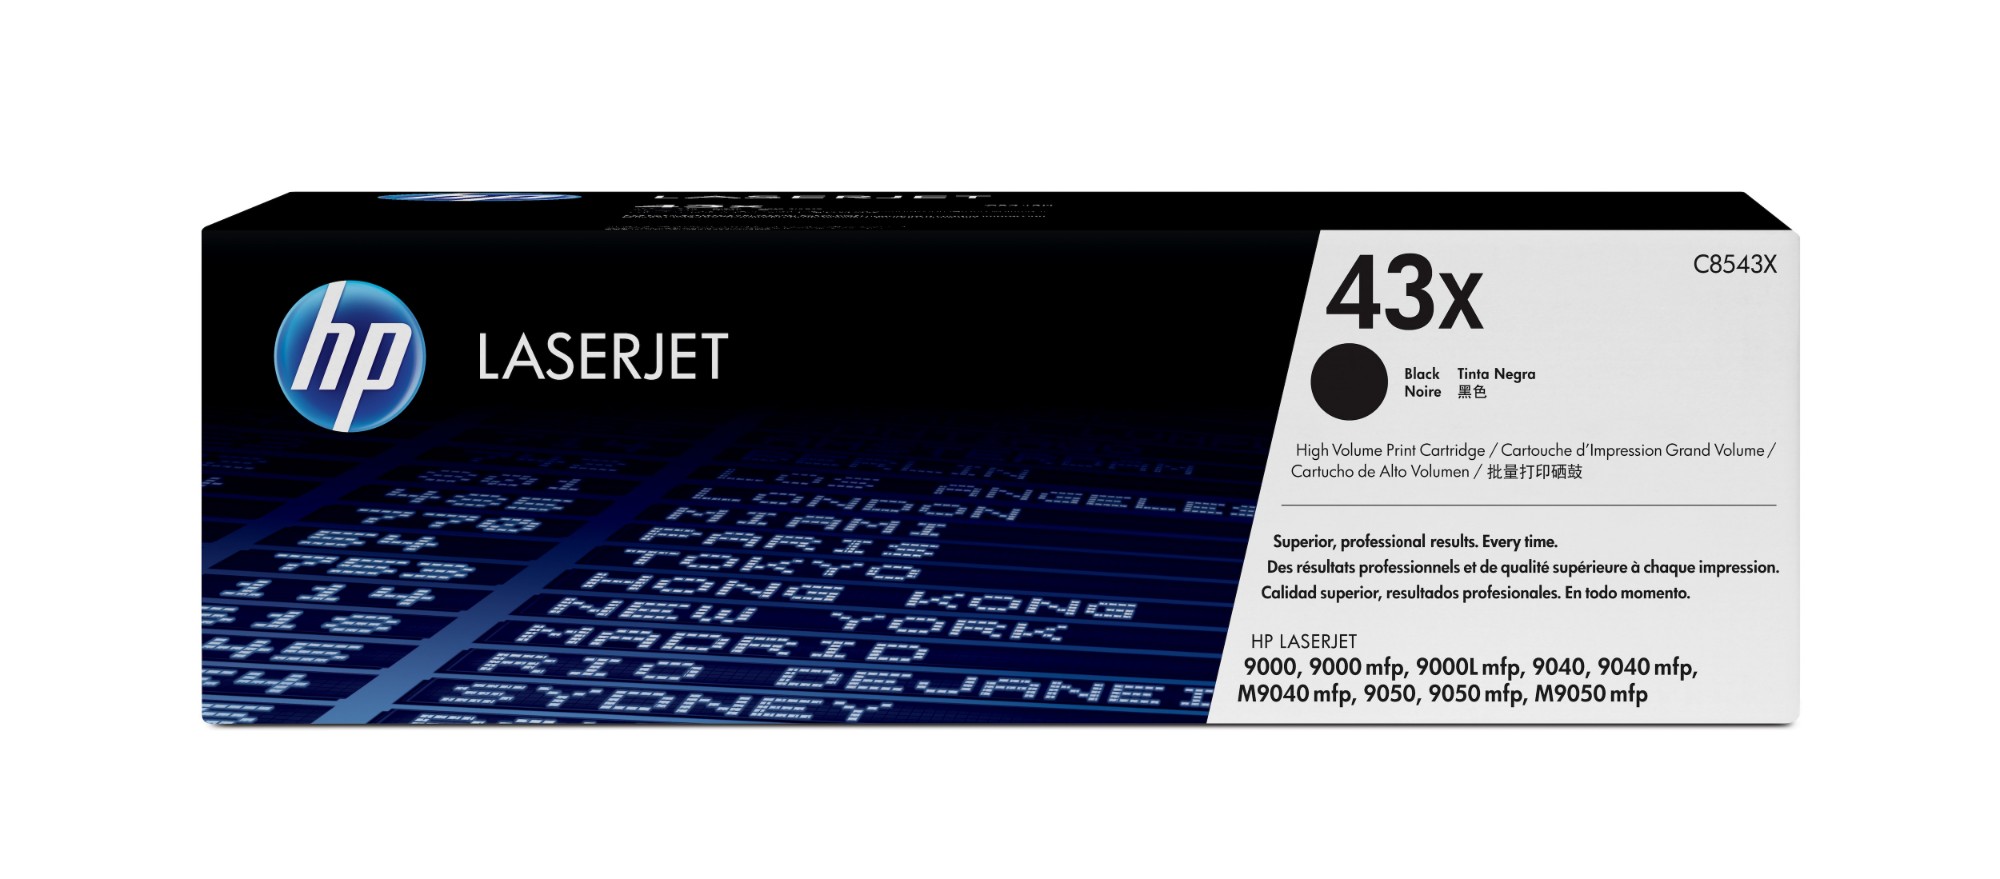 HP C8543X/43X Toner cartridge black high-capacity, 30K pages ISO/IEC 19752 for Canon LBP-5060/Troy 9000